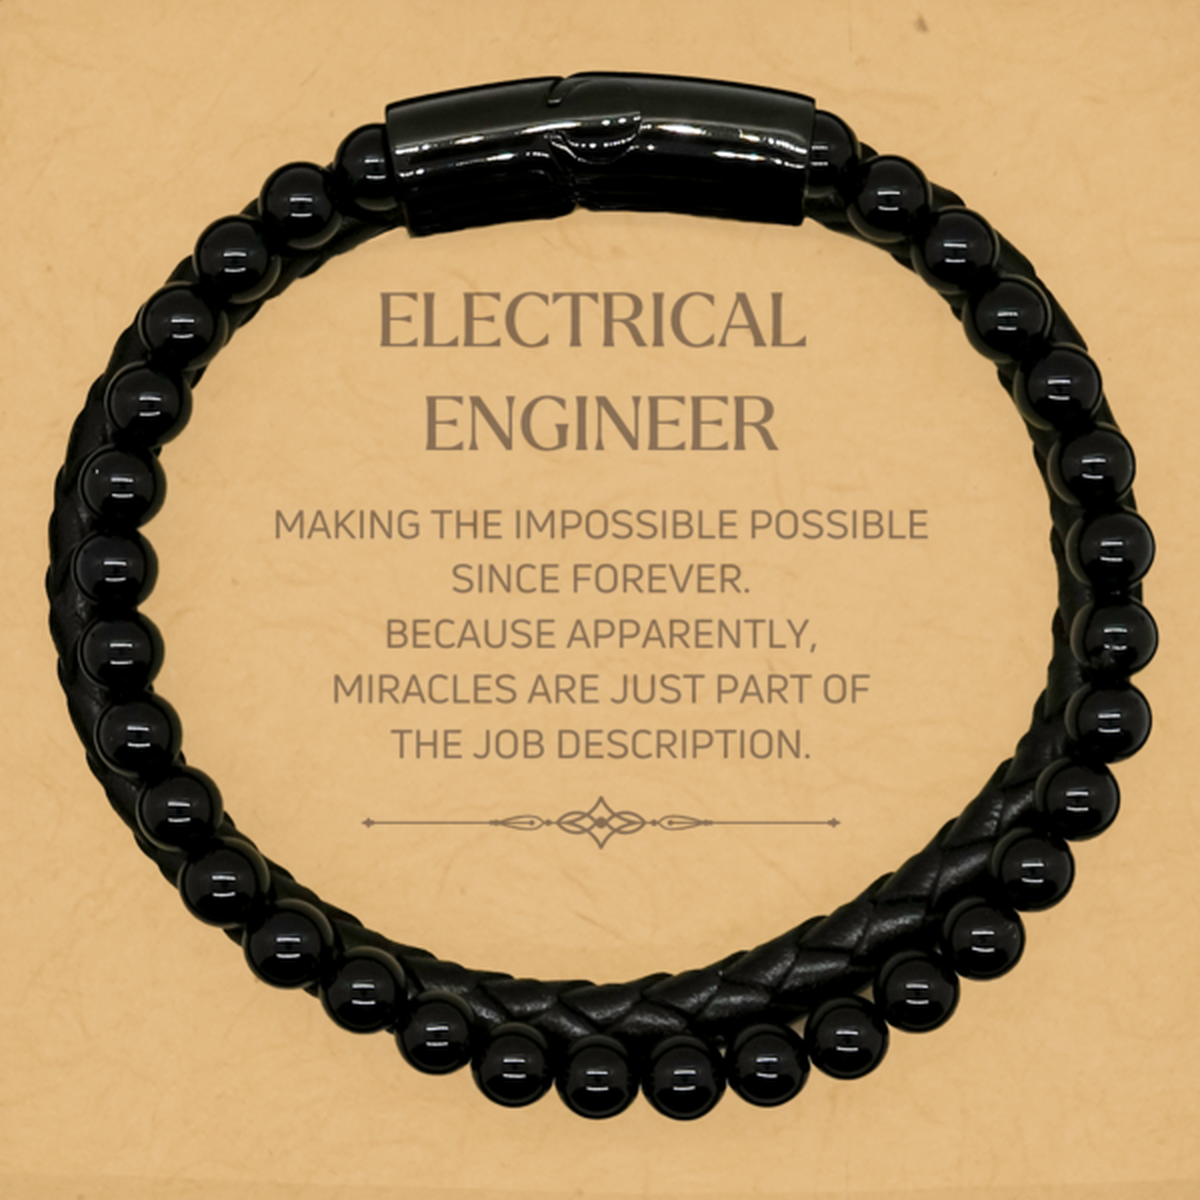 Funny Electrical Engineer Gifts, Miracles are just part of the job description, Inspirational Birthday Stone Leather Bracelets For Electrical Engineer, Men, Women, Coworkers, Friends, Boss